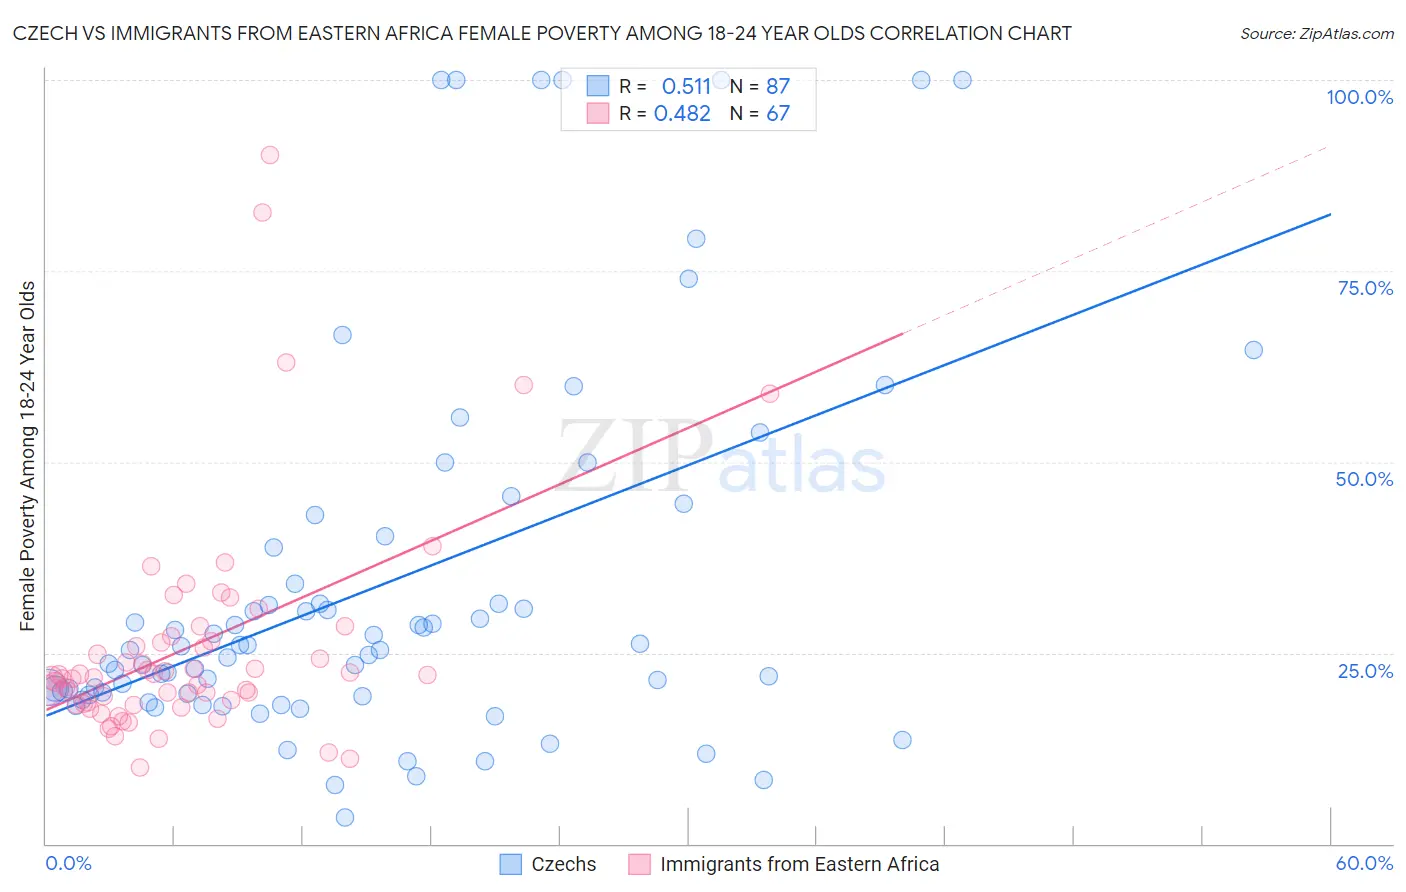 Czech vs Immigrants from Eastern Africa Female Poverty Among 18-24 Year Olds